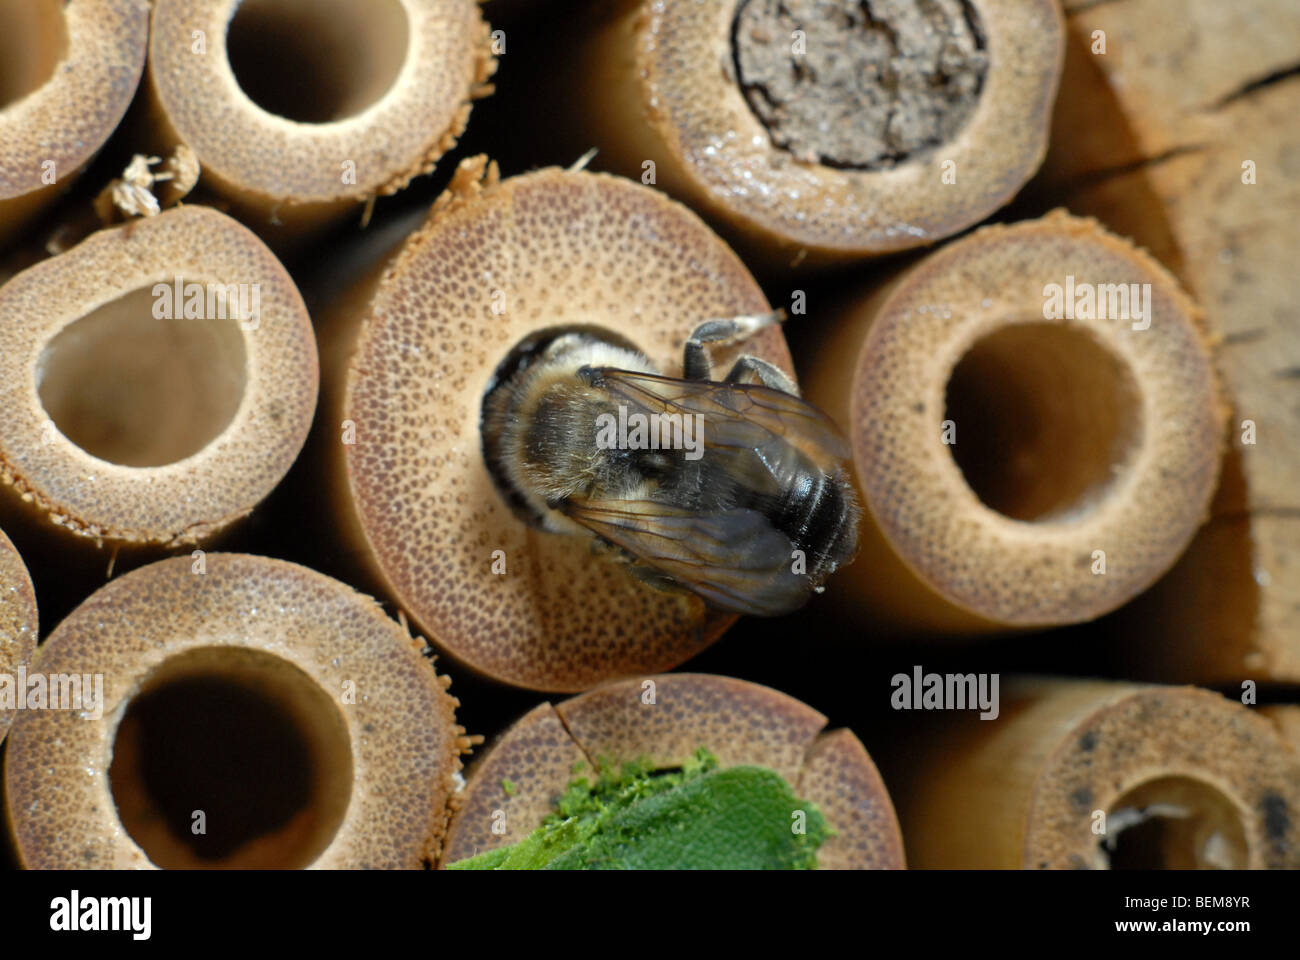 A leafcutter bee, Megachile centuncularis, on a bamboo home for solitary bees. Stock Photo